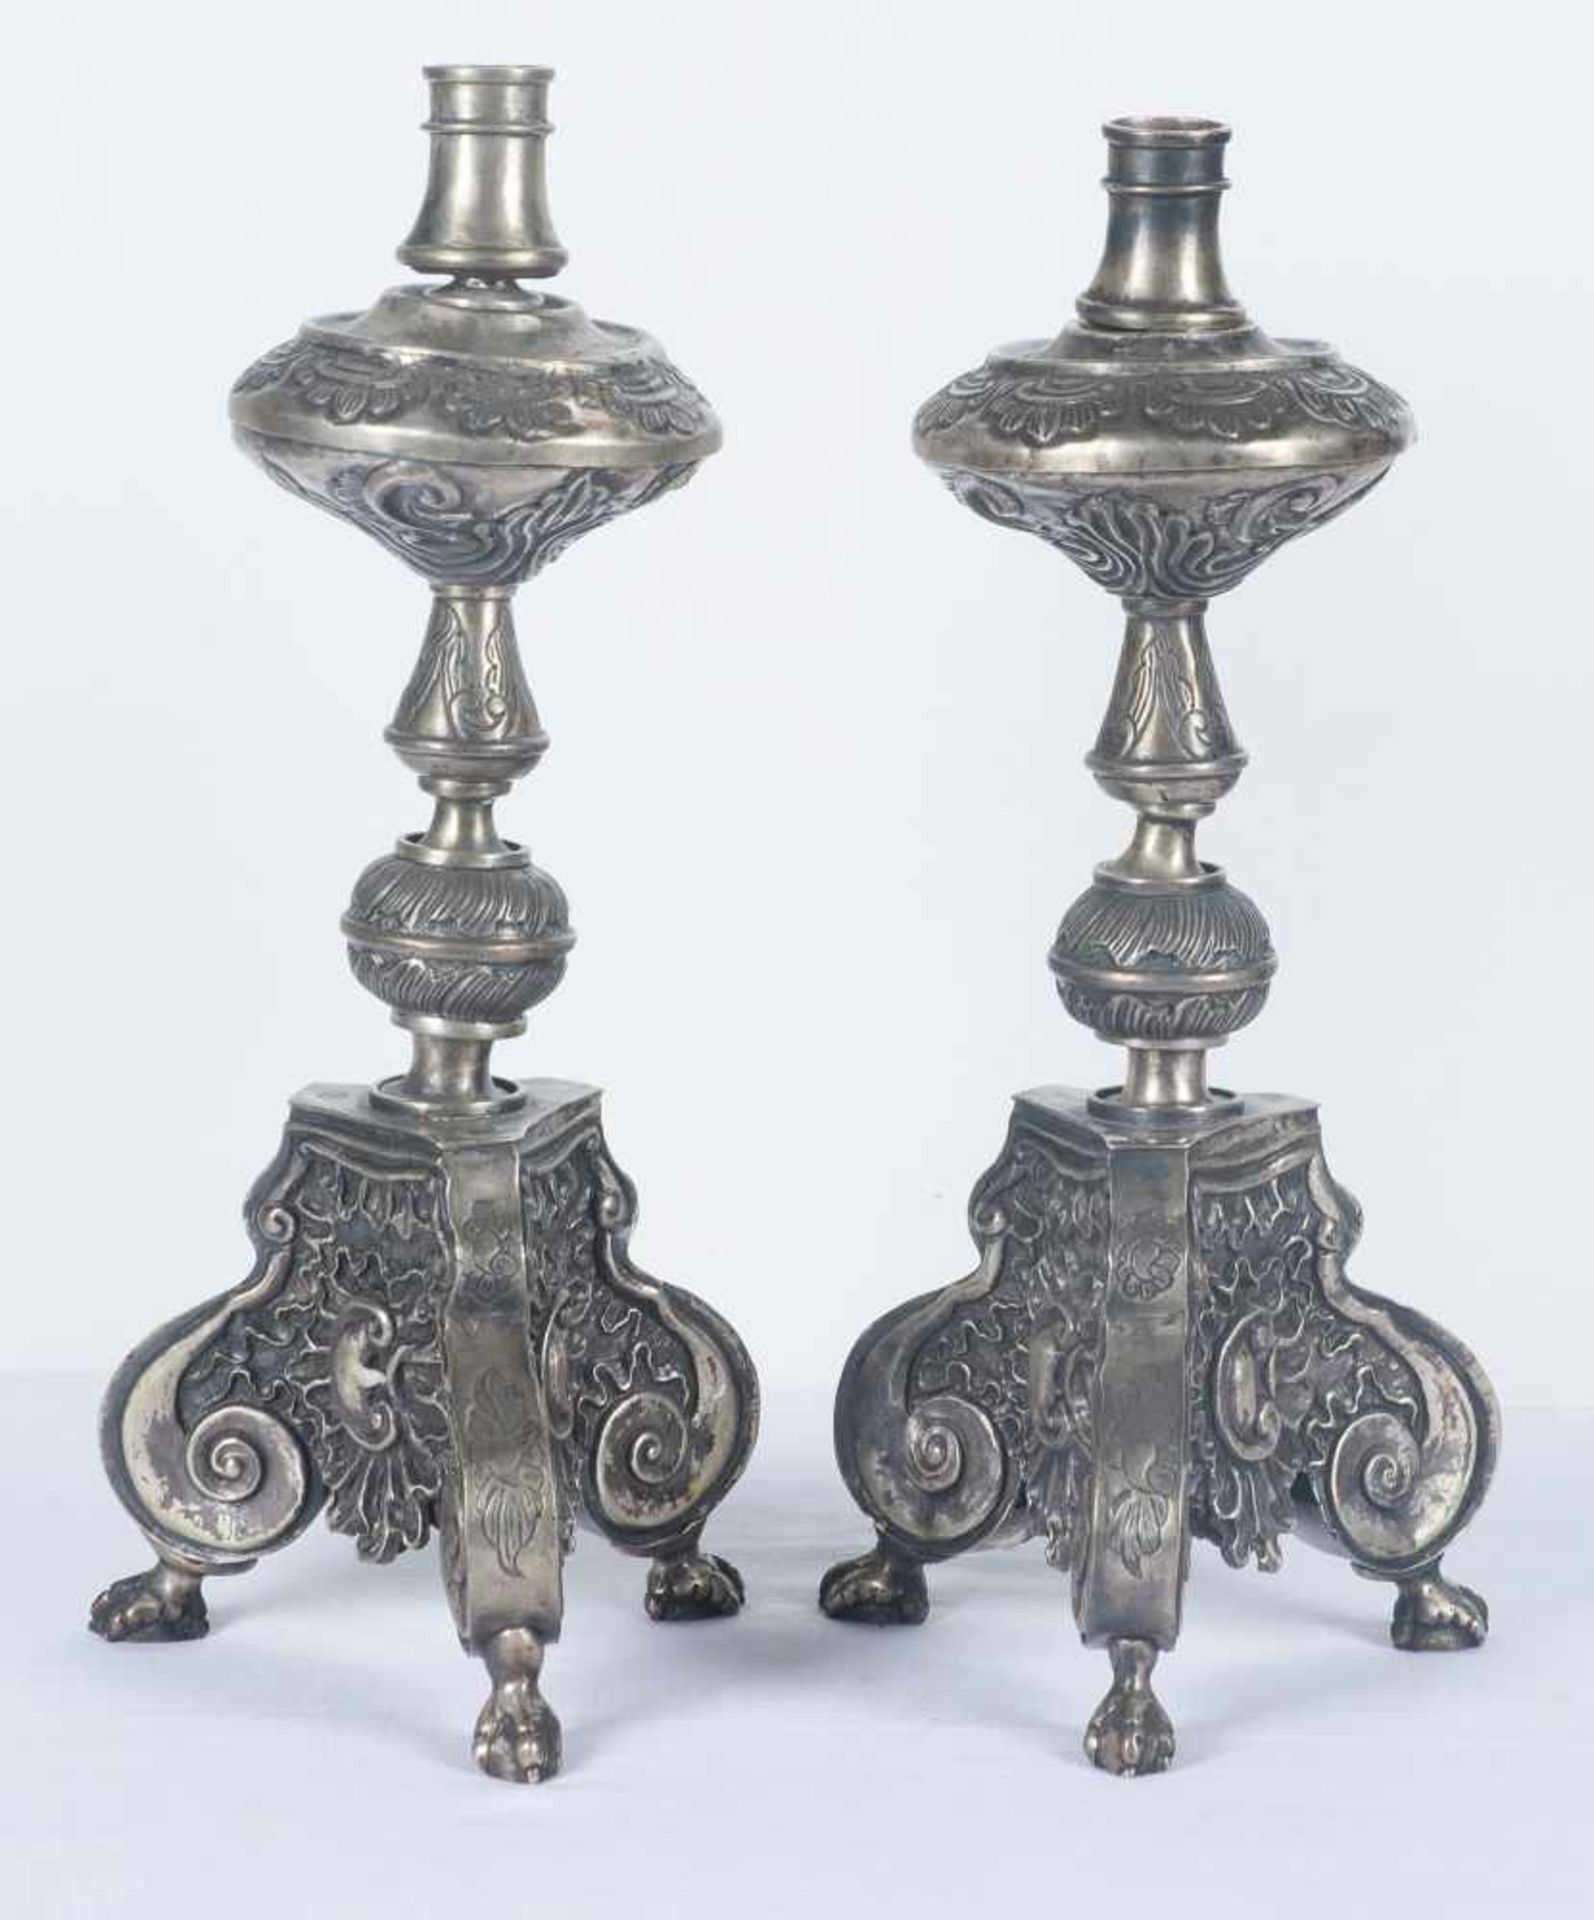 Pair of embossed silver candlesticks with wooden interior. 18th century. Height: 30,5 cm. each. - Bild 2 aus 2